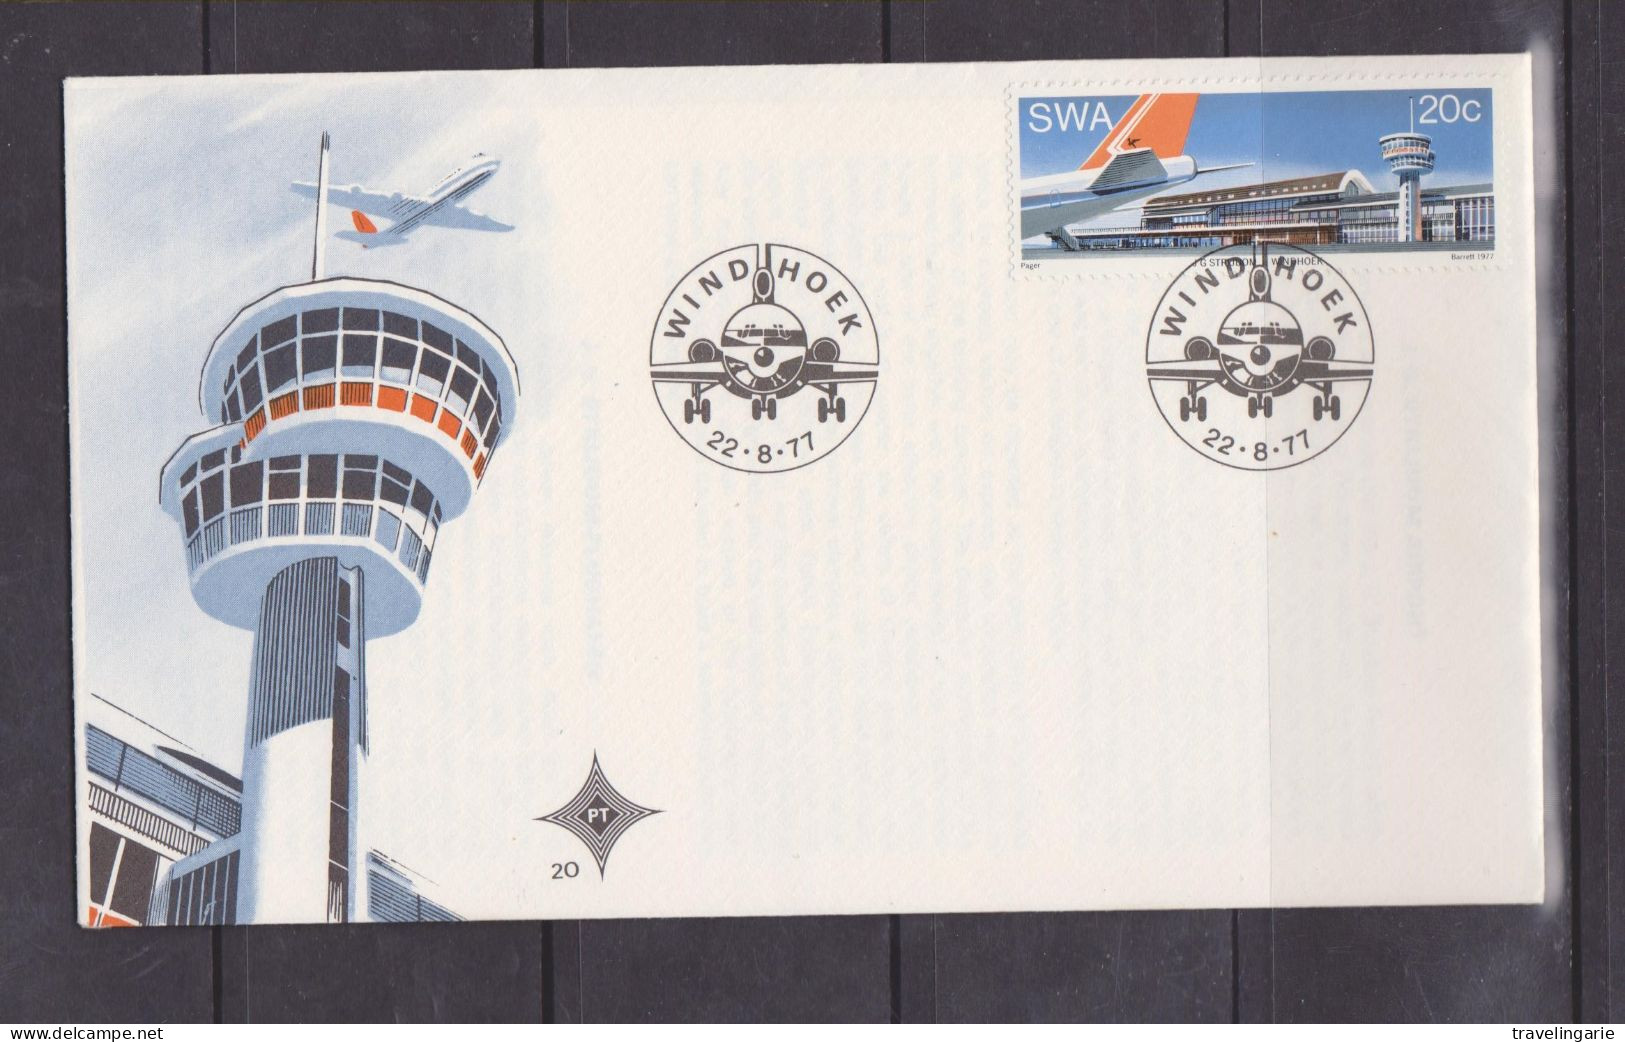 South West Africa 1977 J.G. Strijdom Airport With FDC Nr. 20 With Windhoek Aeroplane Cancel - Aviones